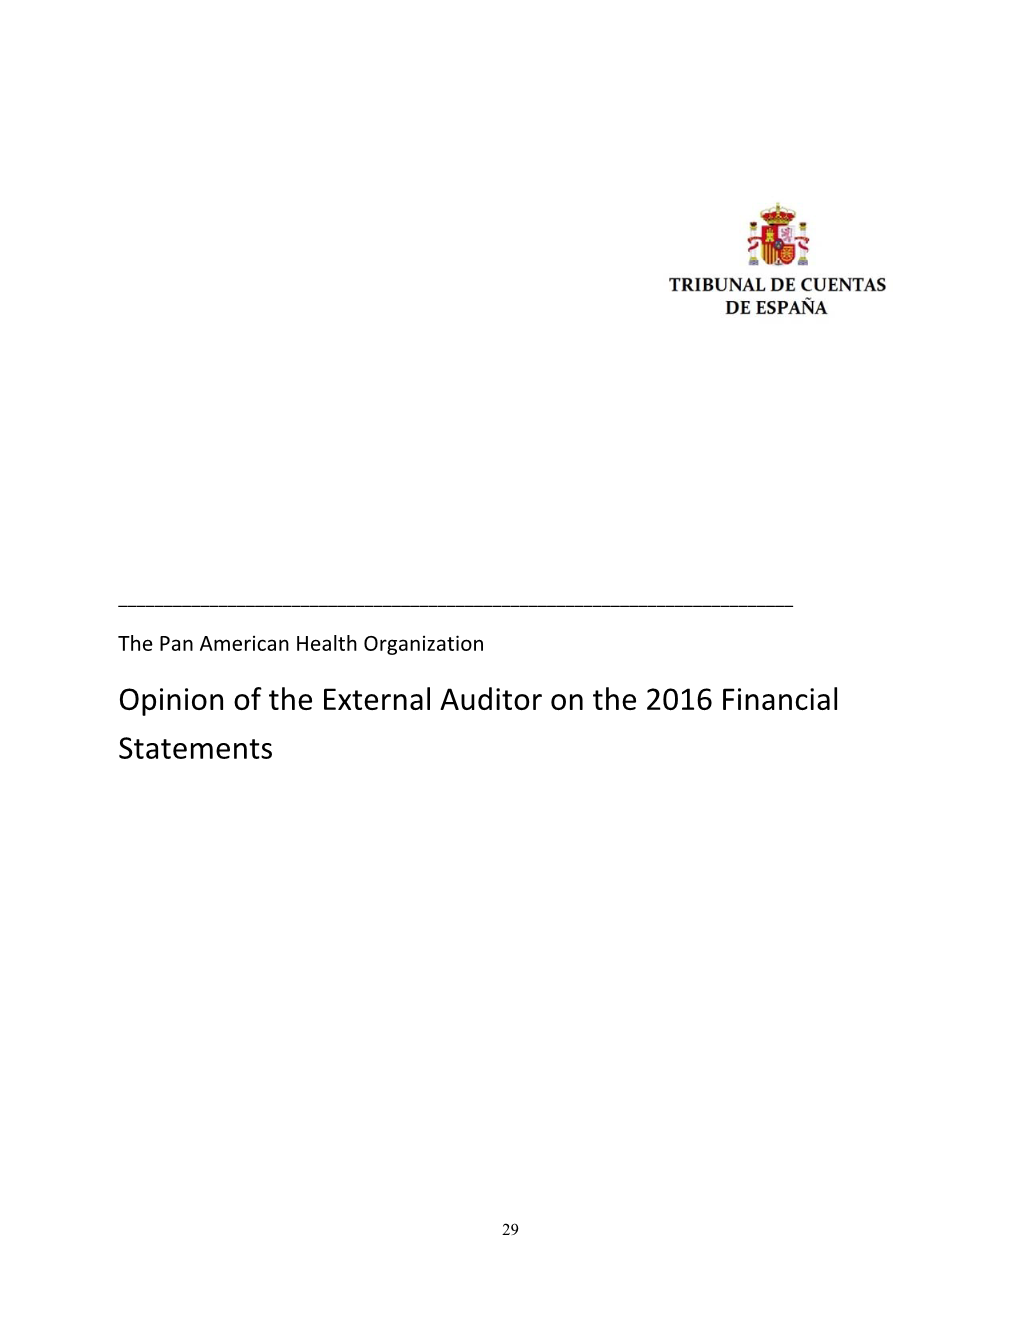 Opinion of the External Auditor on the 2016 Financial Statements